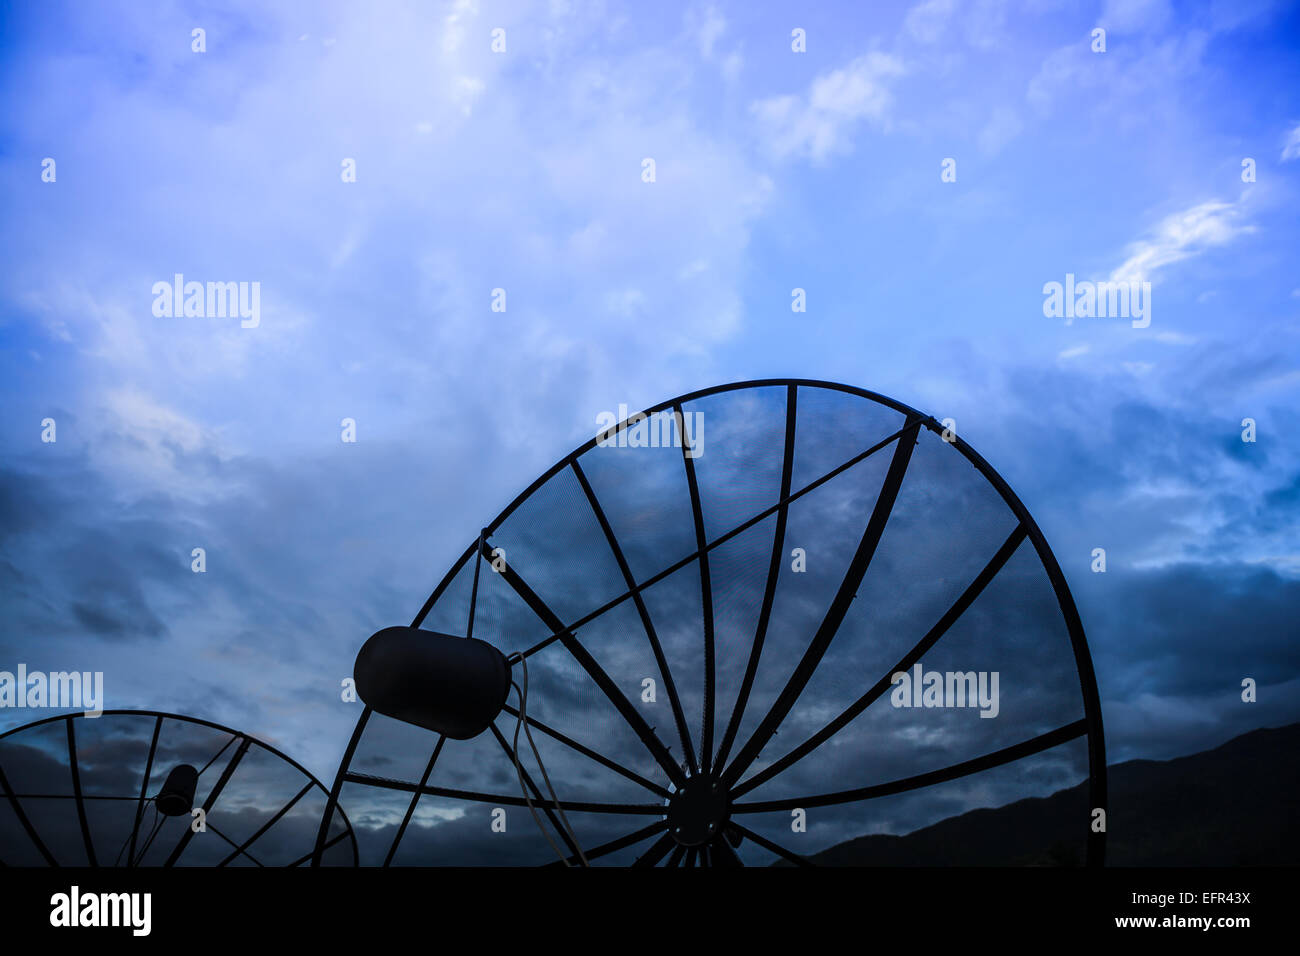 Double black Satellite dish against blue cloudy sky in early morning Stock Photo